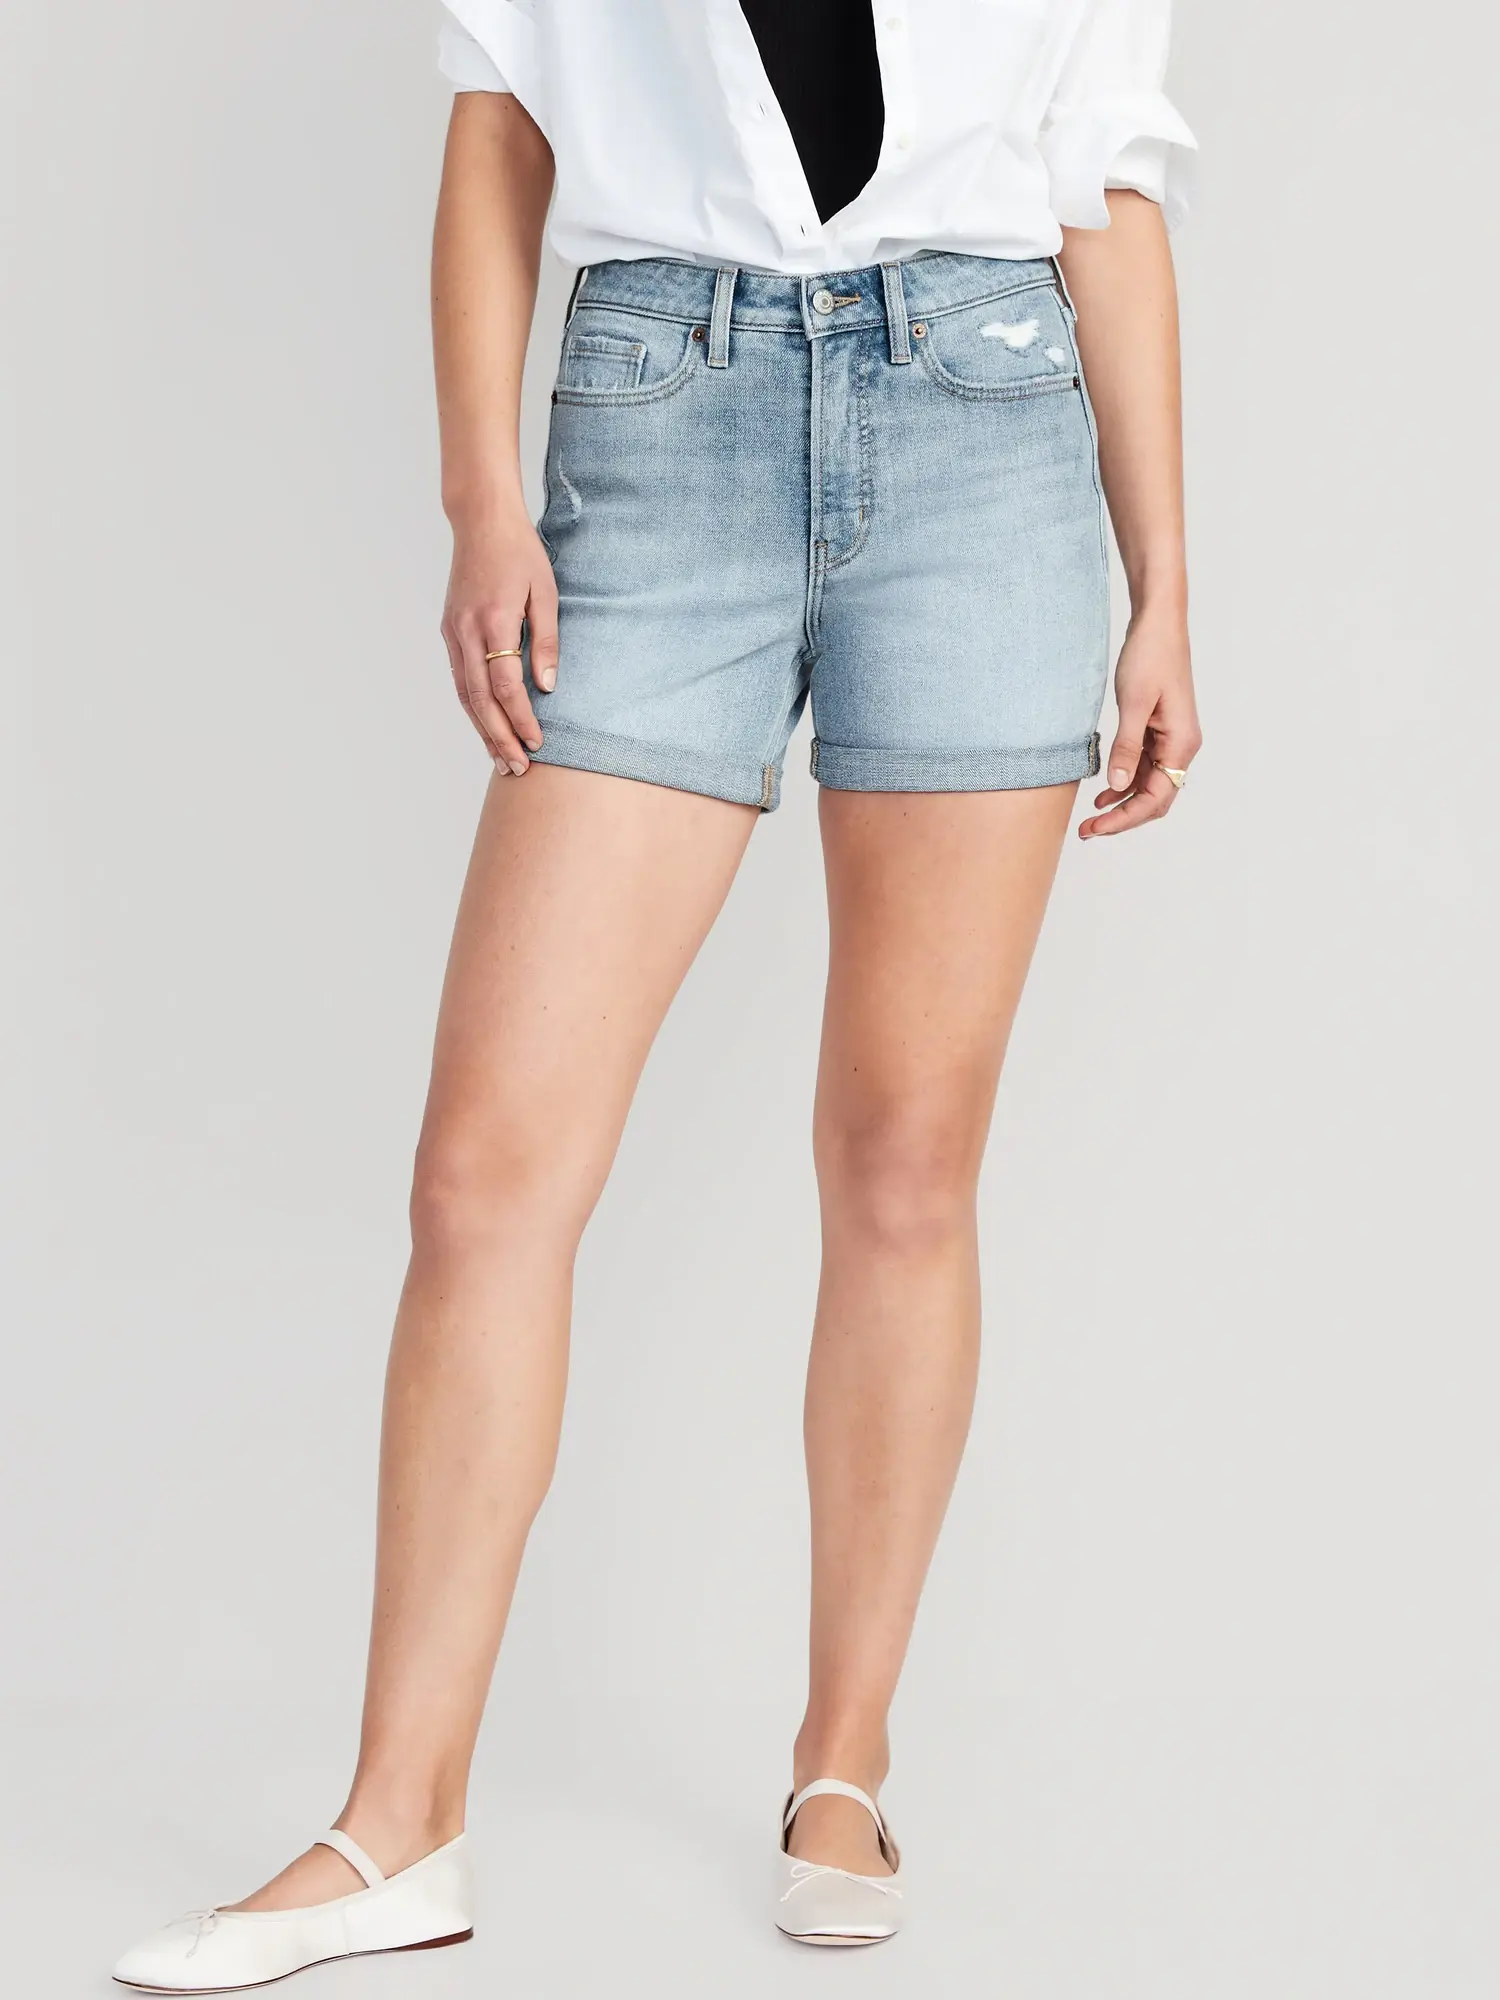 Old Navy High-Waisted OG Cuffed Jean Shorts for Women -- 5-inch inseam blue. 1